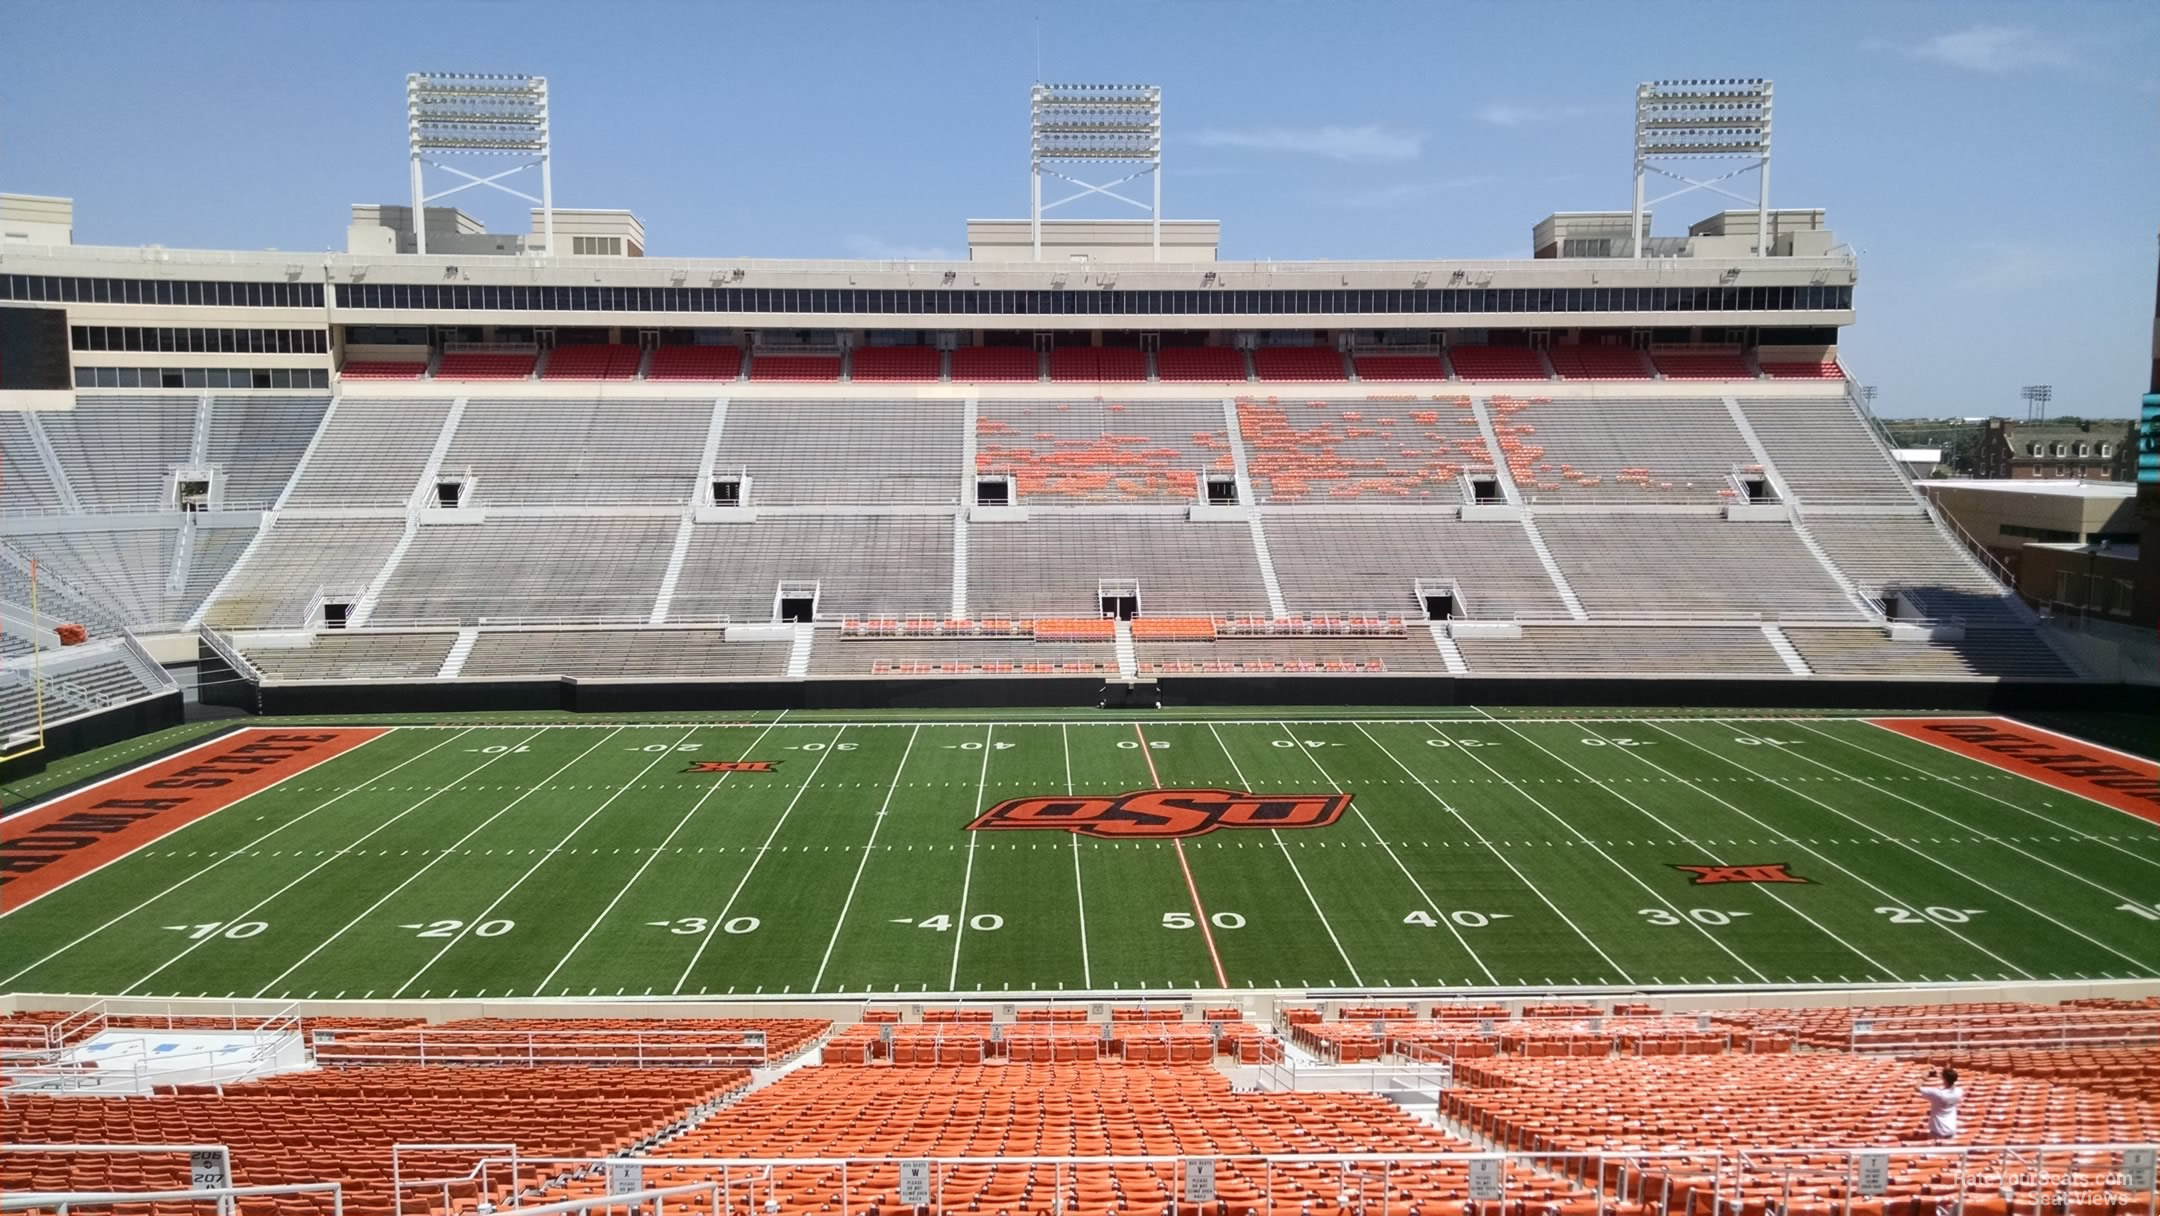 section 306, row 19 seat view  - boone pickens stadium